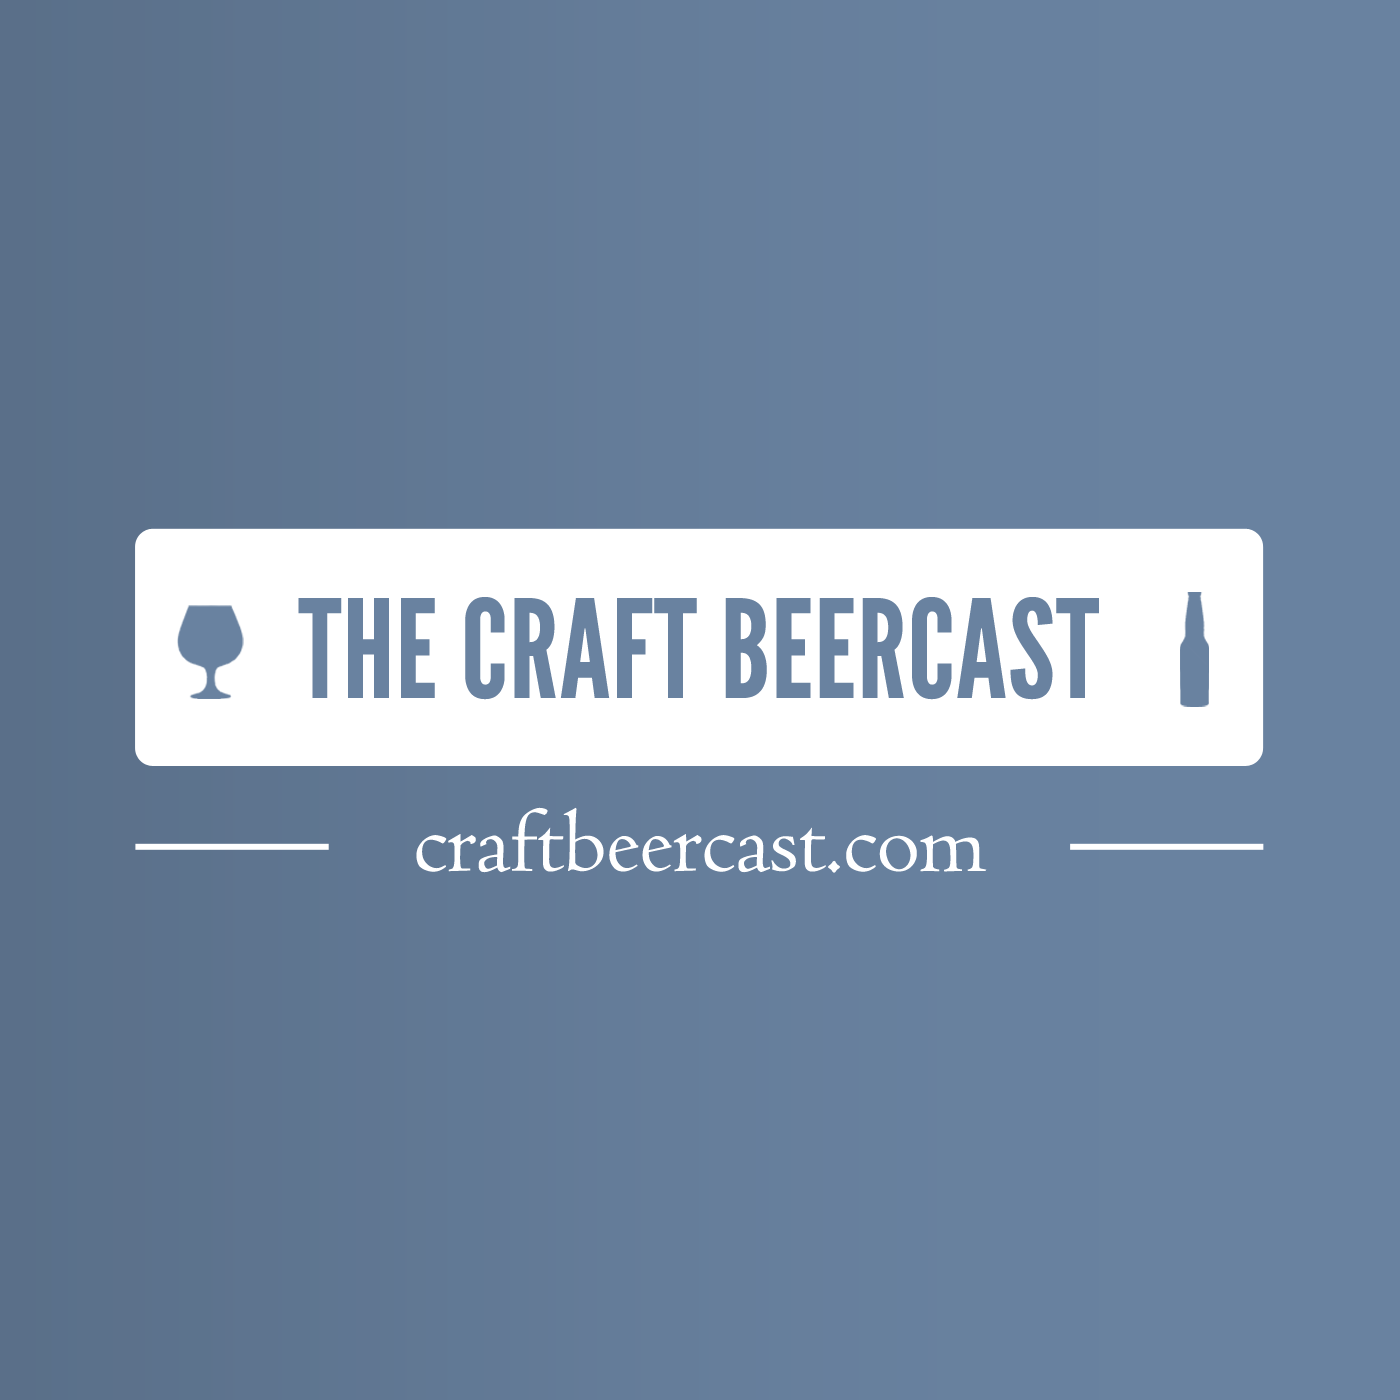 The Craft Beercast